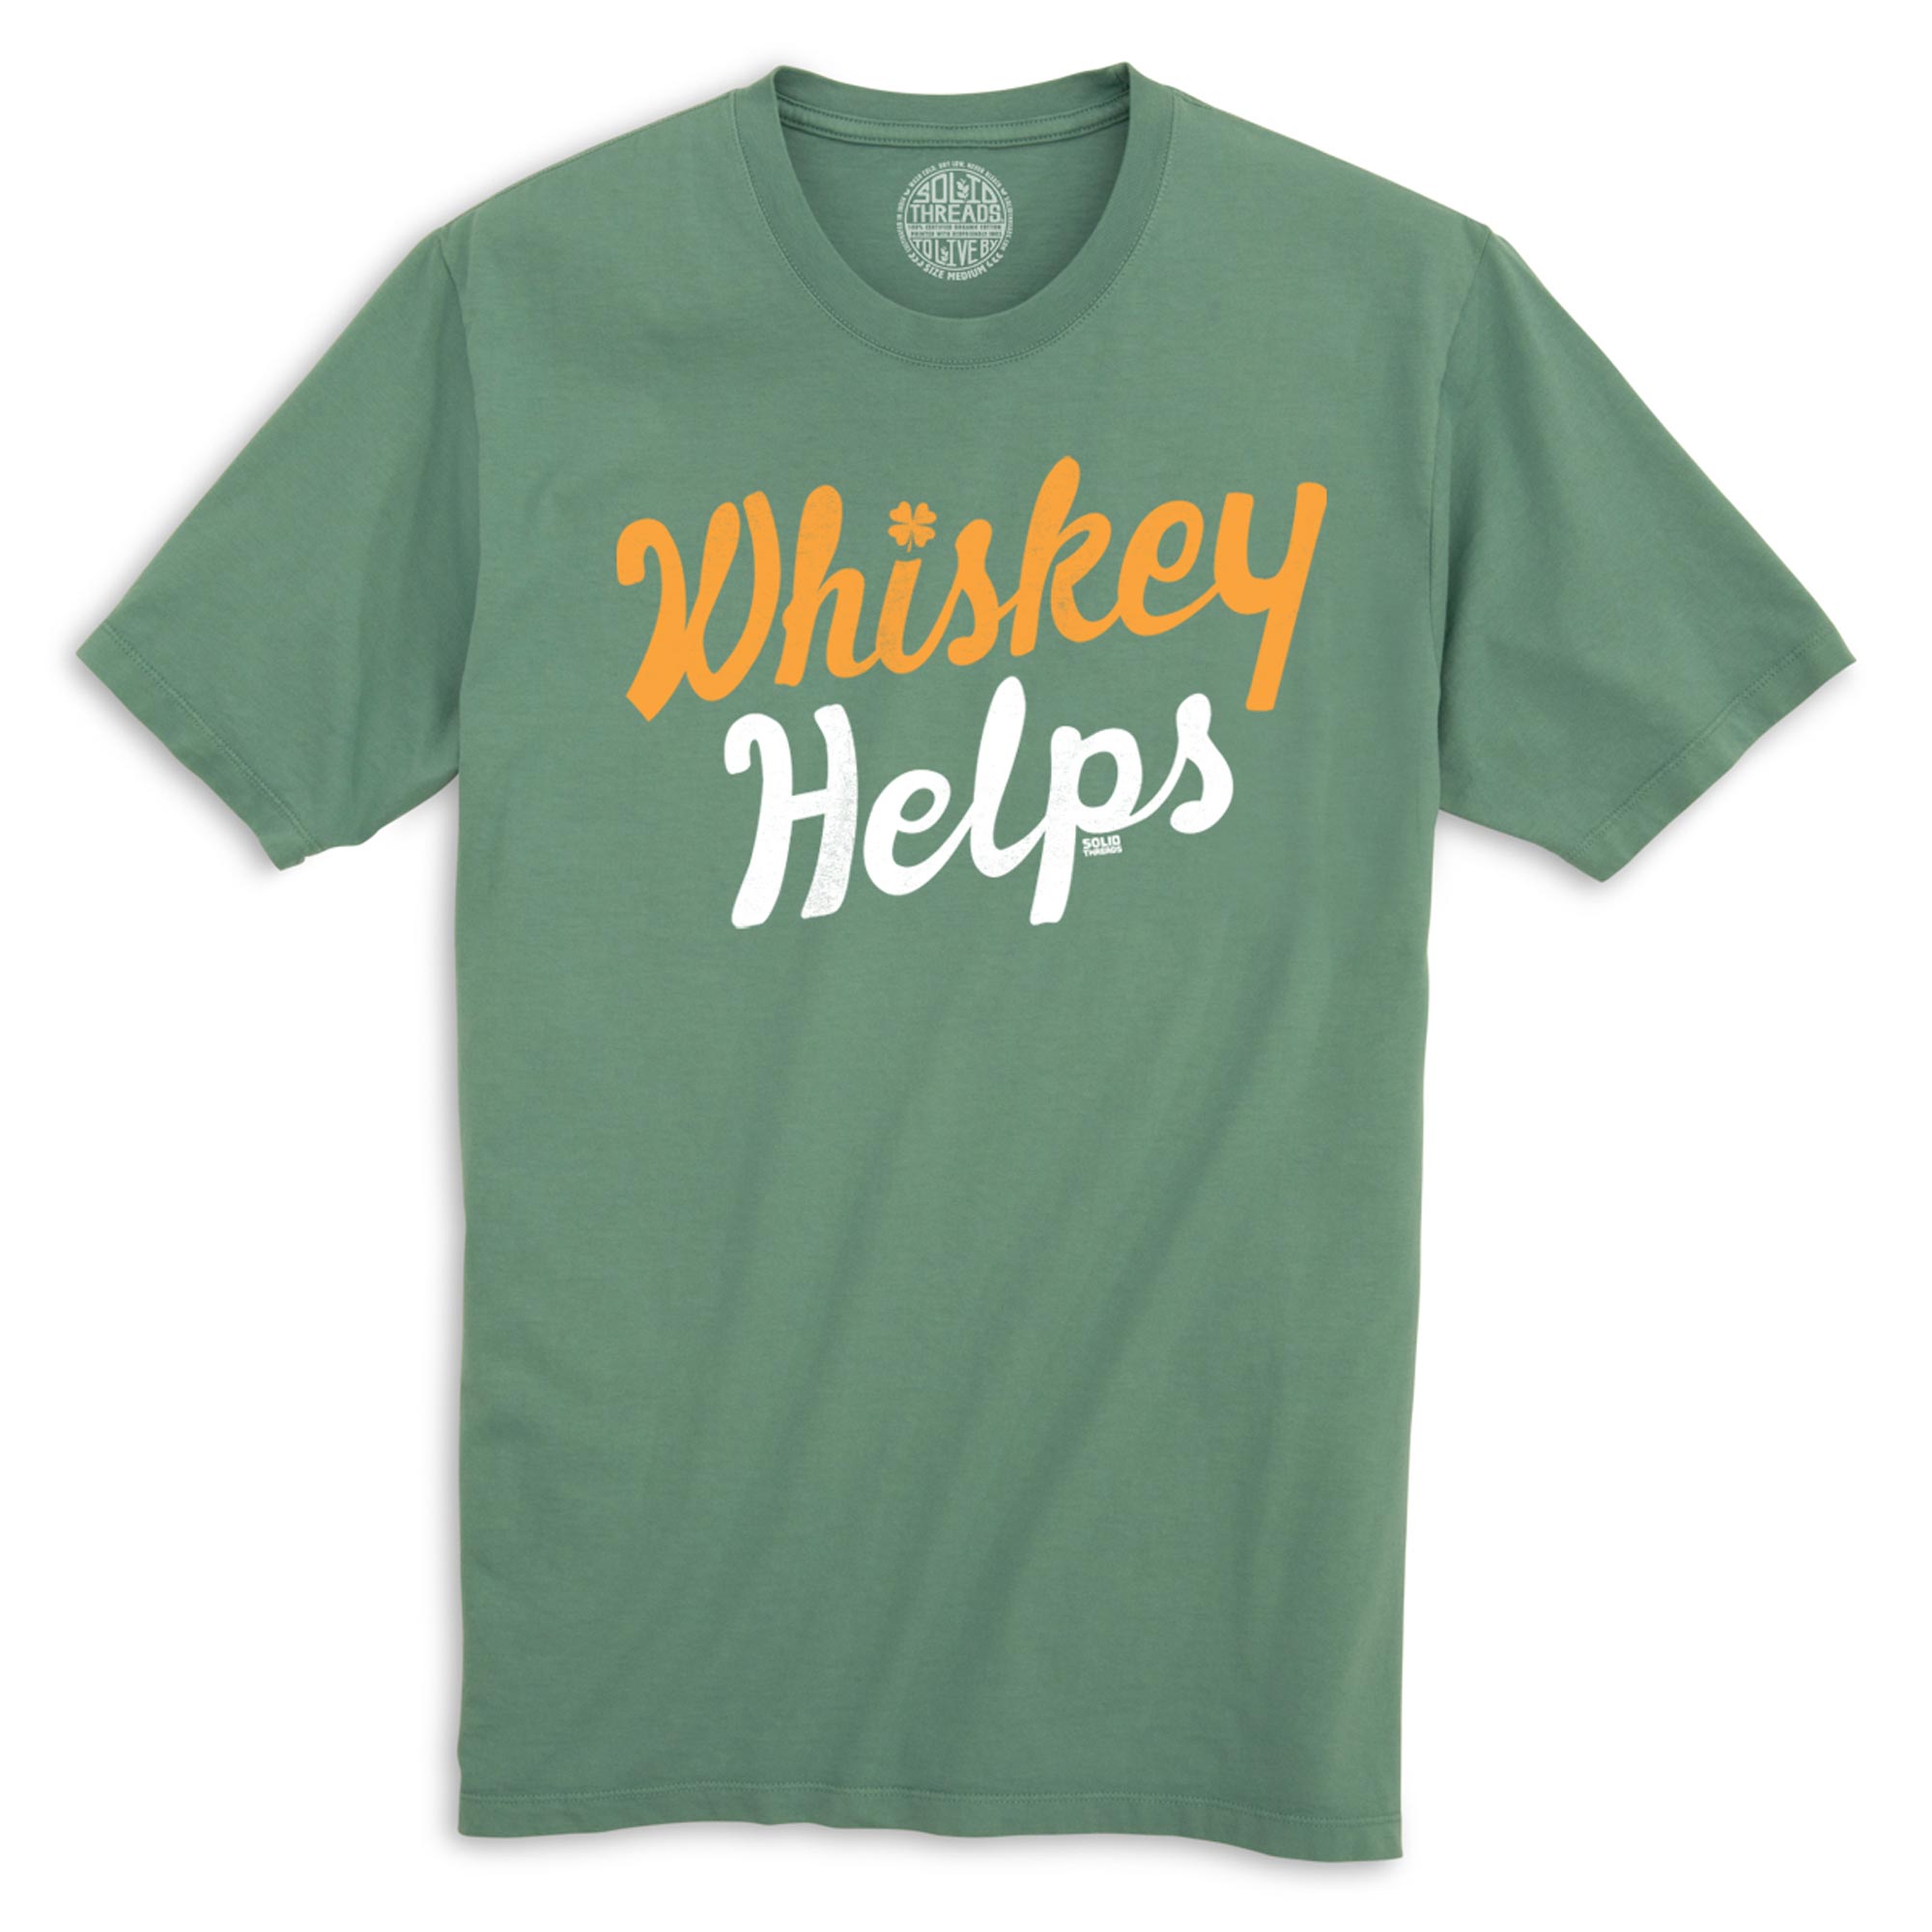 Irish Whiskey Helps Funny Organic Cotton T-shirt | Vintage St Paddy's  Tee | Solid Threads